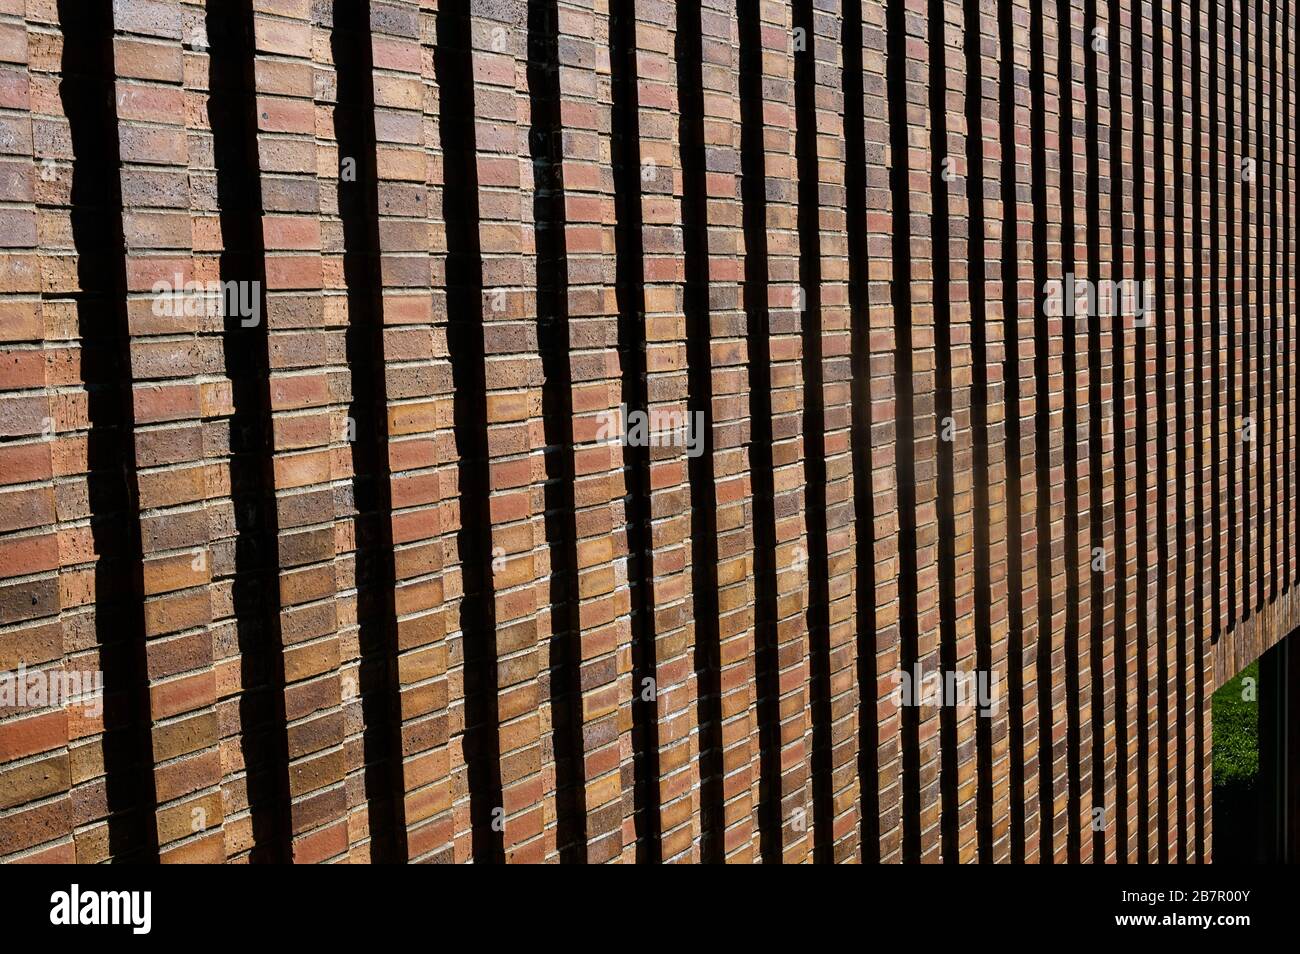 Abstract image with strong vertical lines Stock Photo